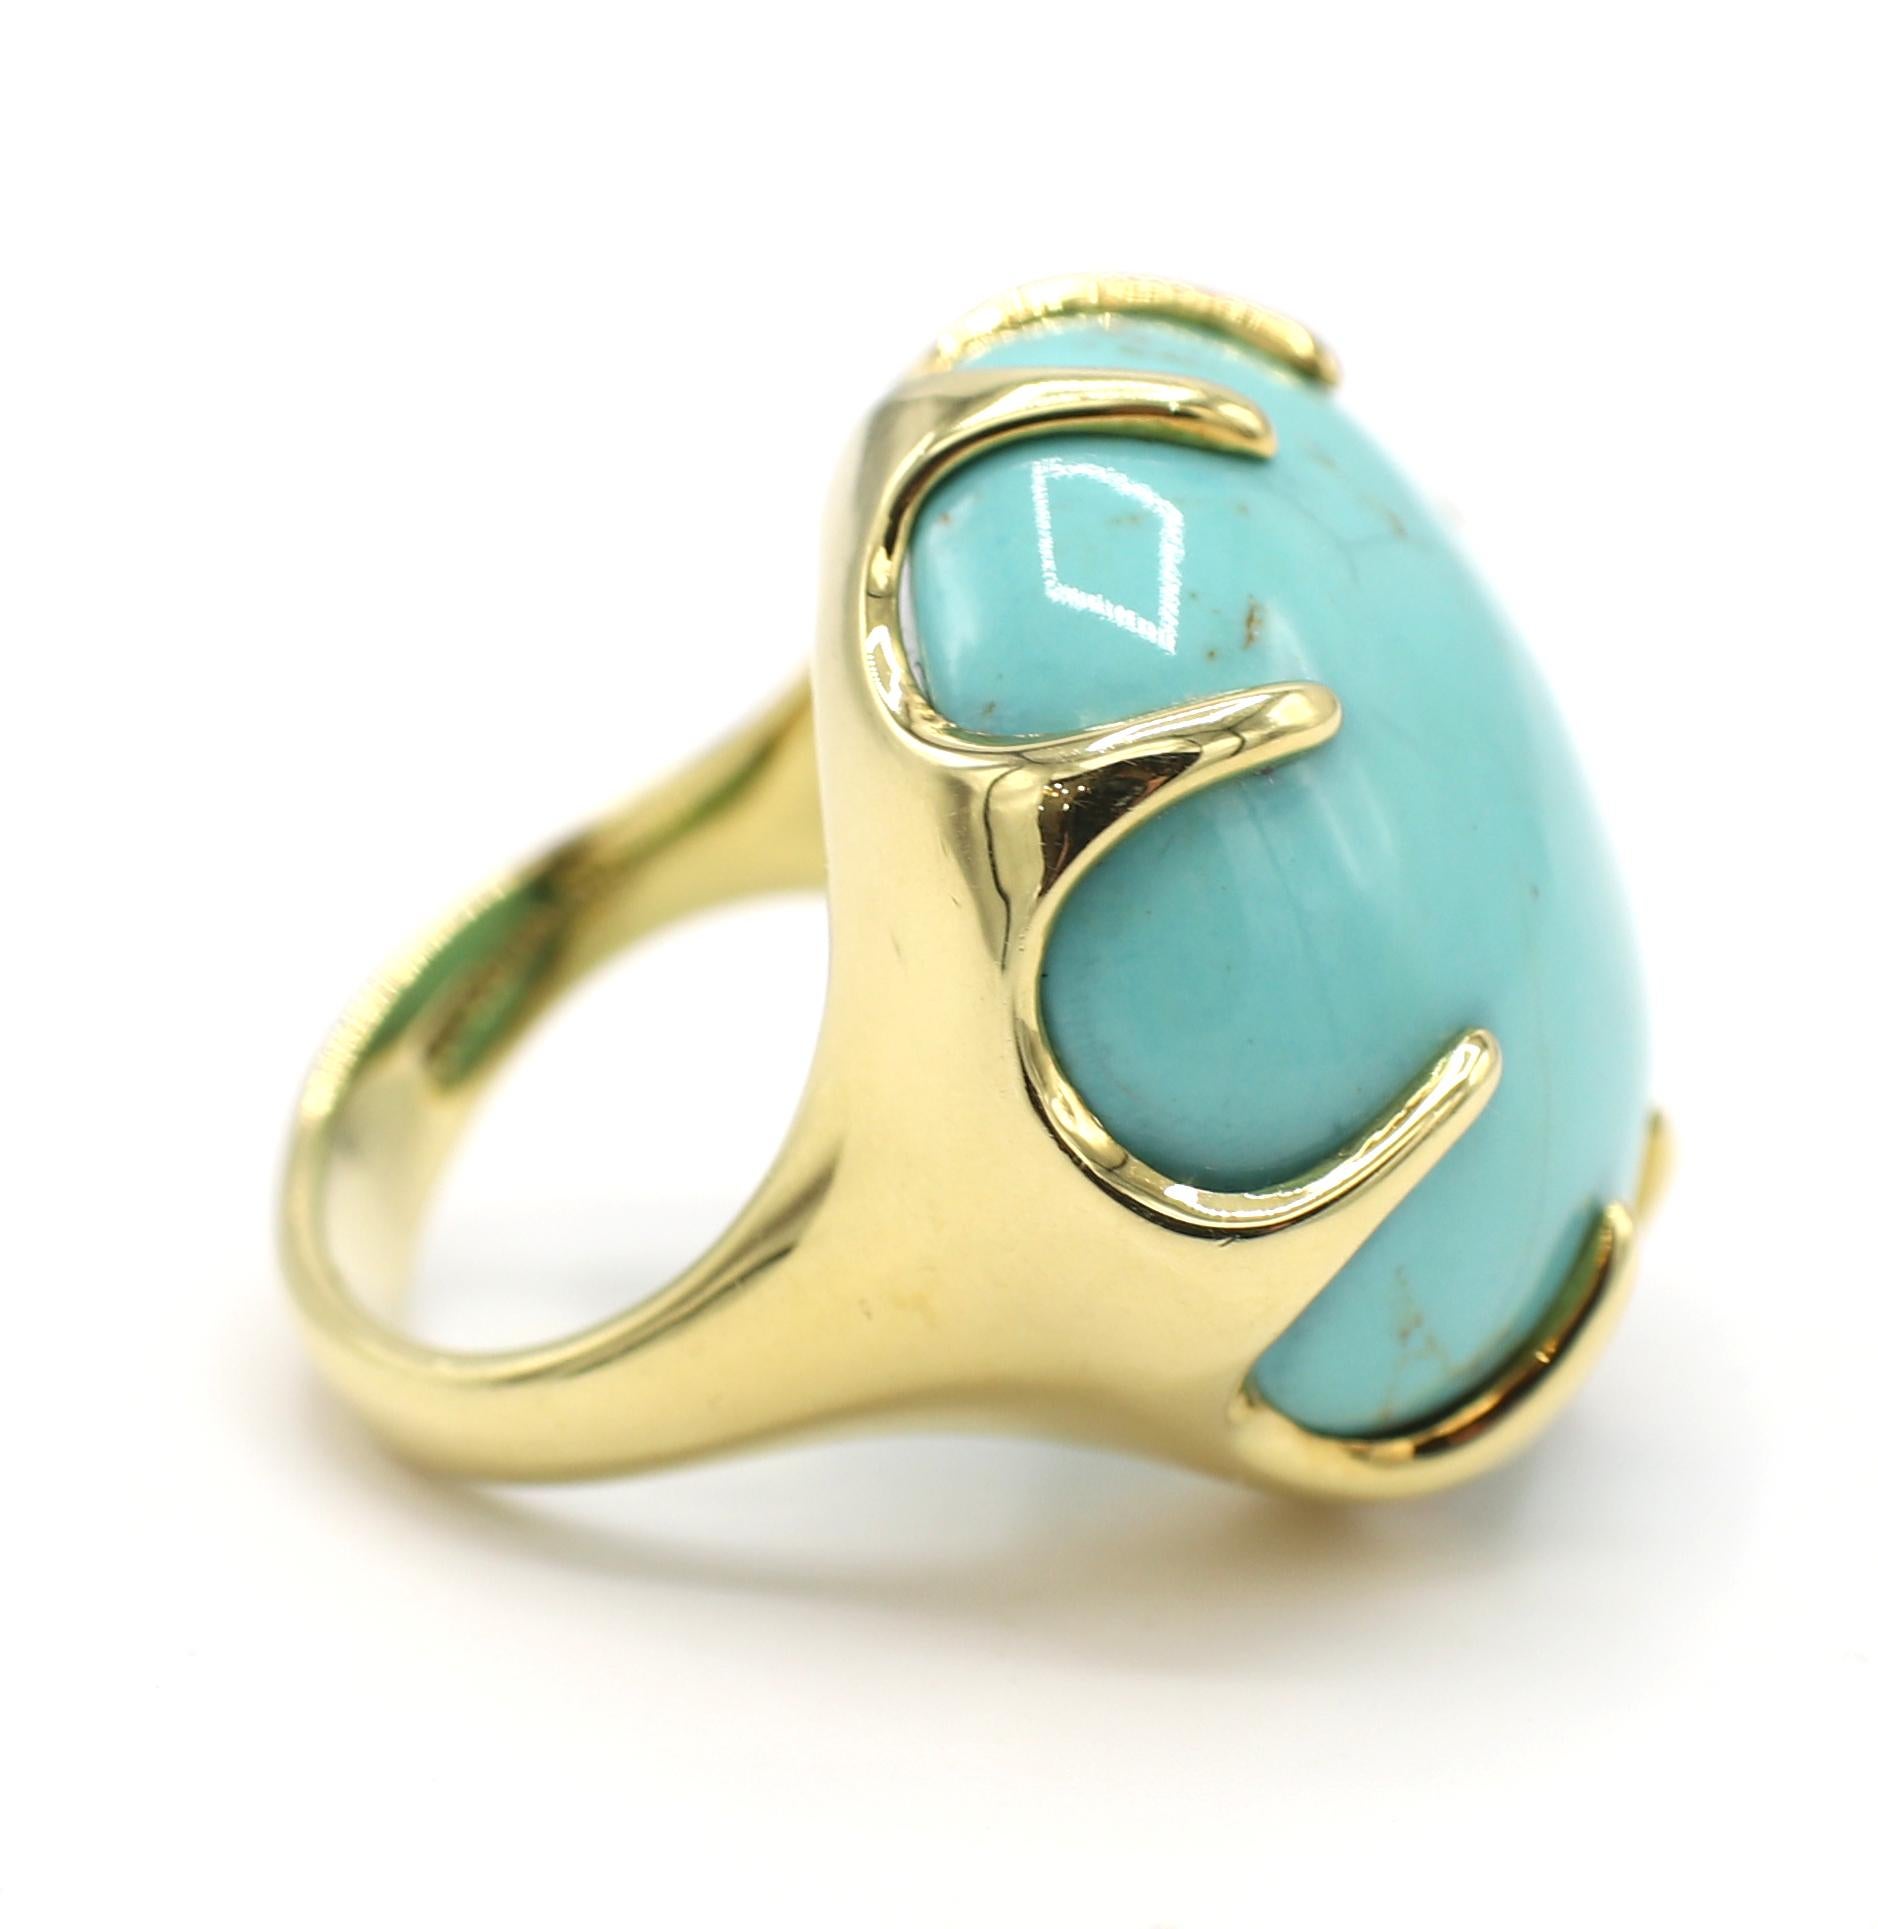 Women's Ippolita Turquoise Cabochon Dome Cocktail Ring 18 Karat Yellow Gold